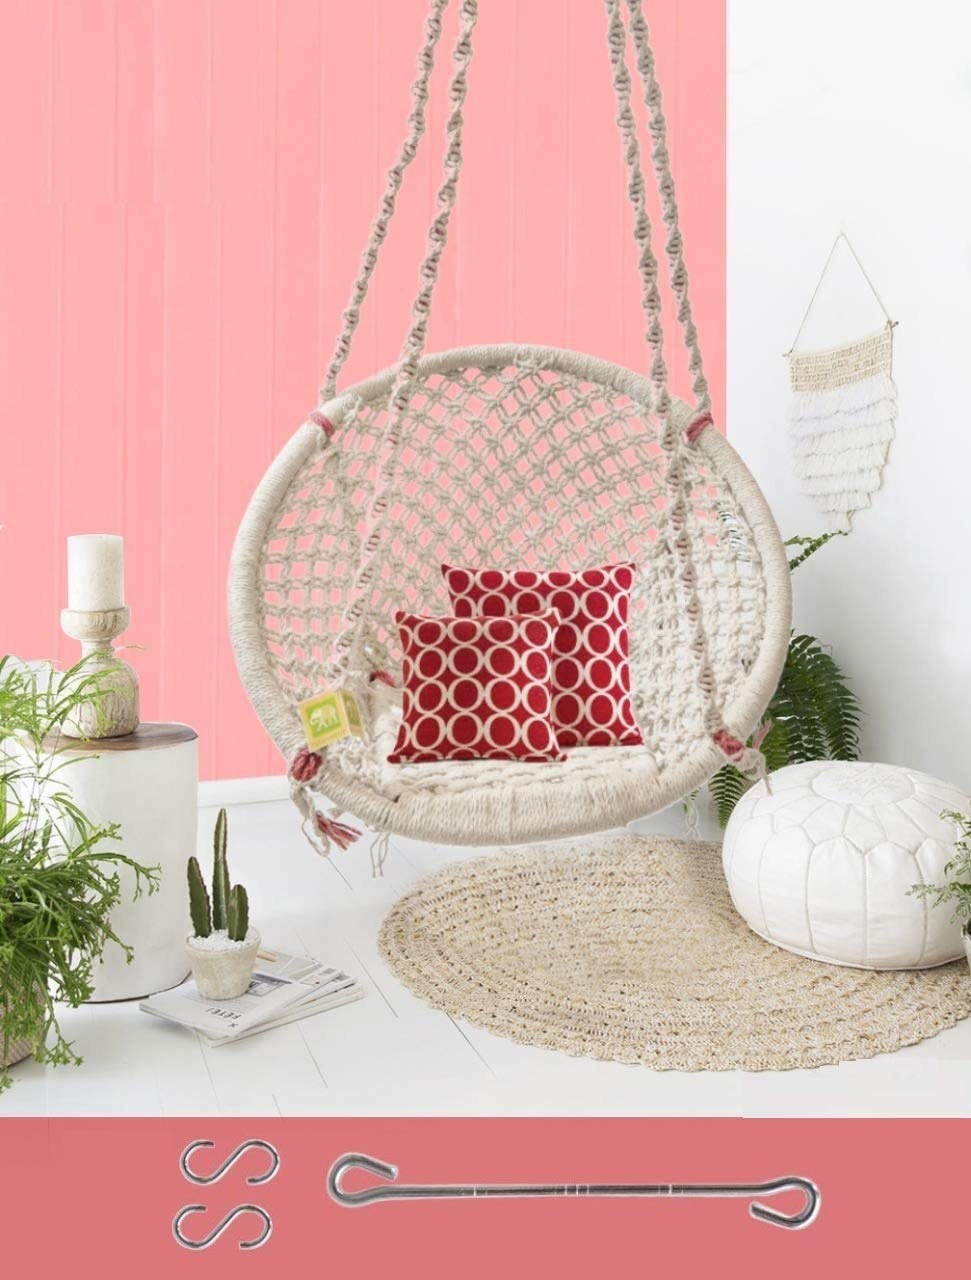 A swing chair next to a rug